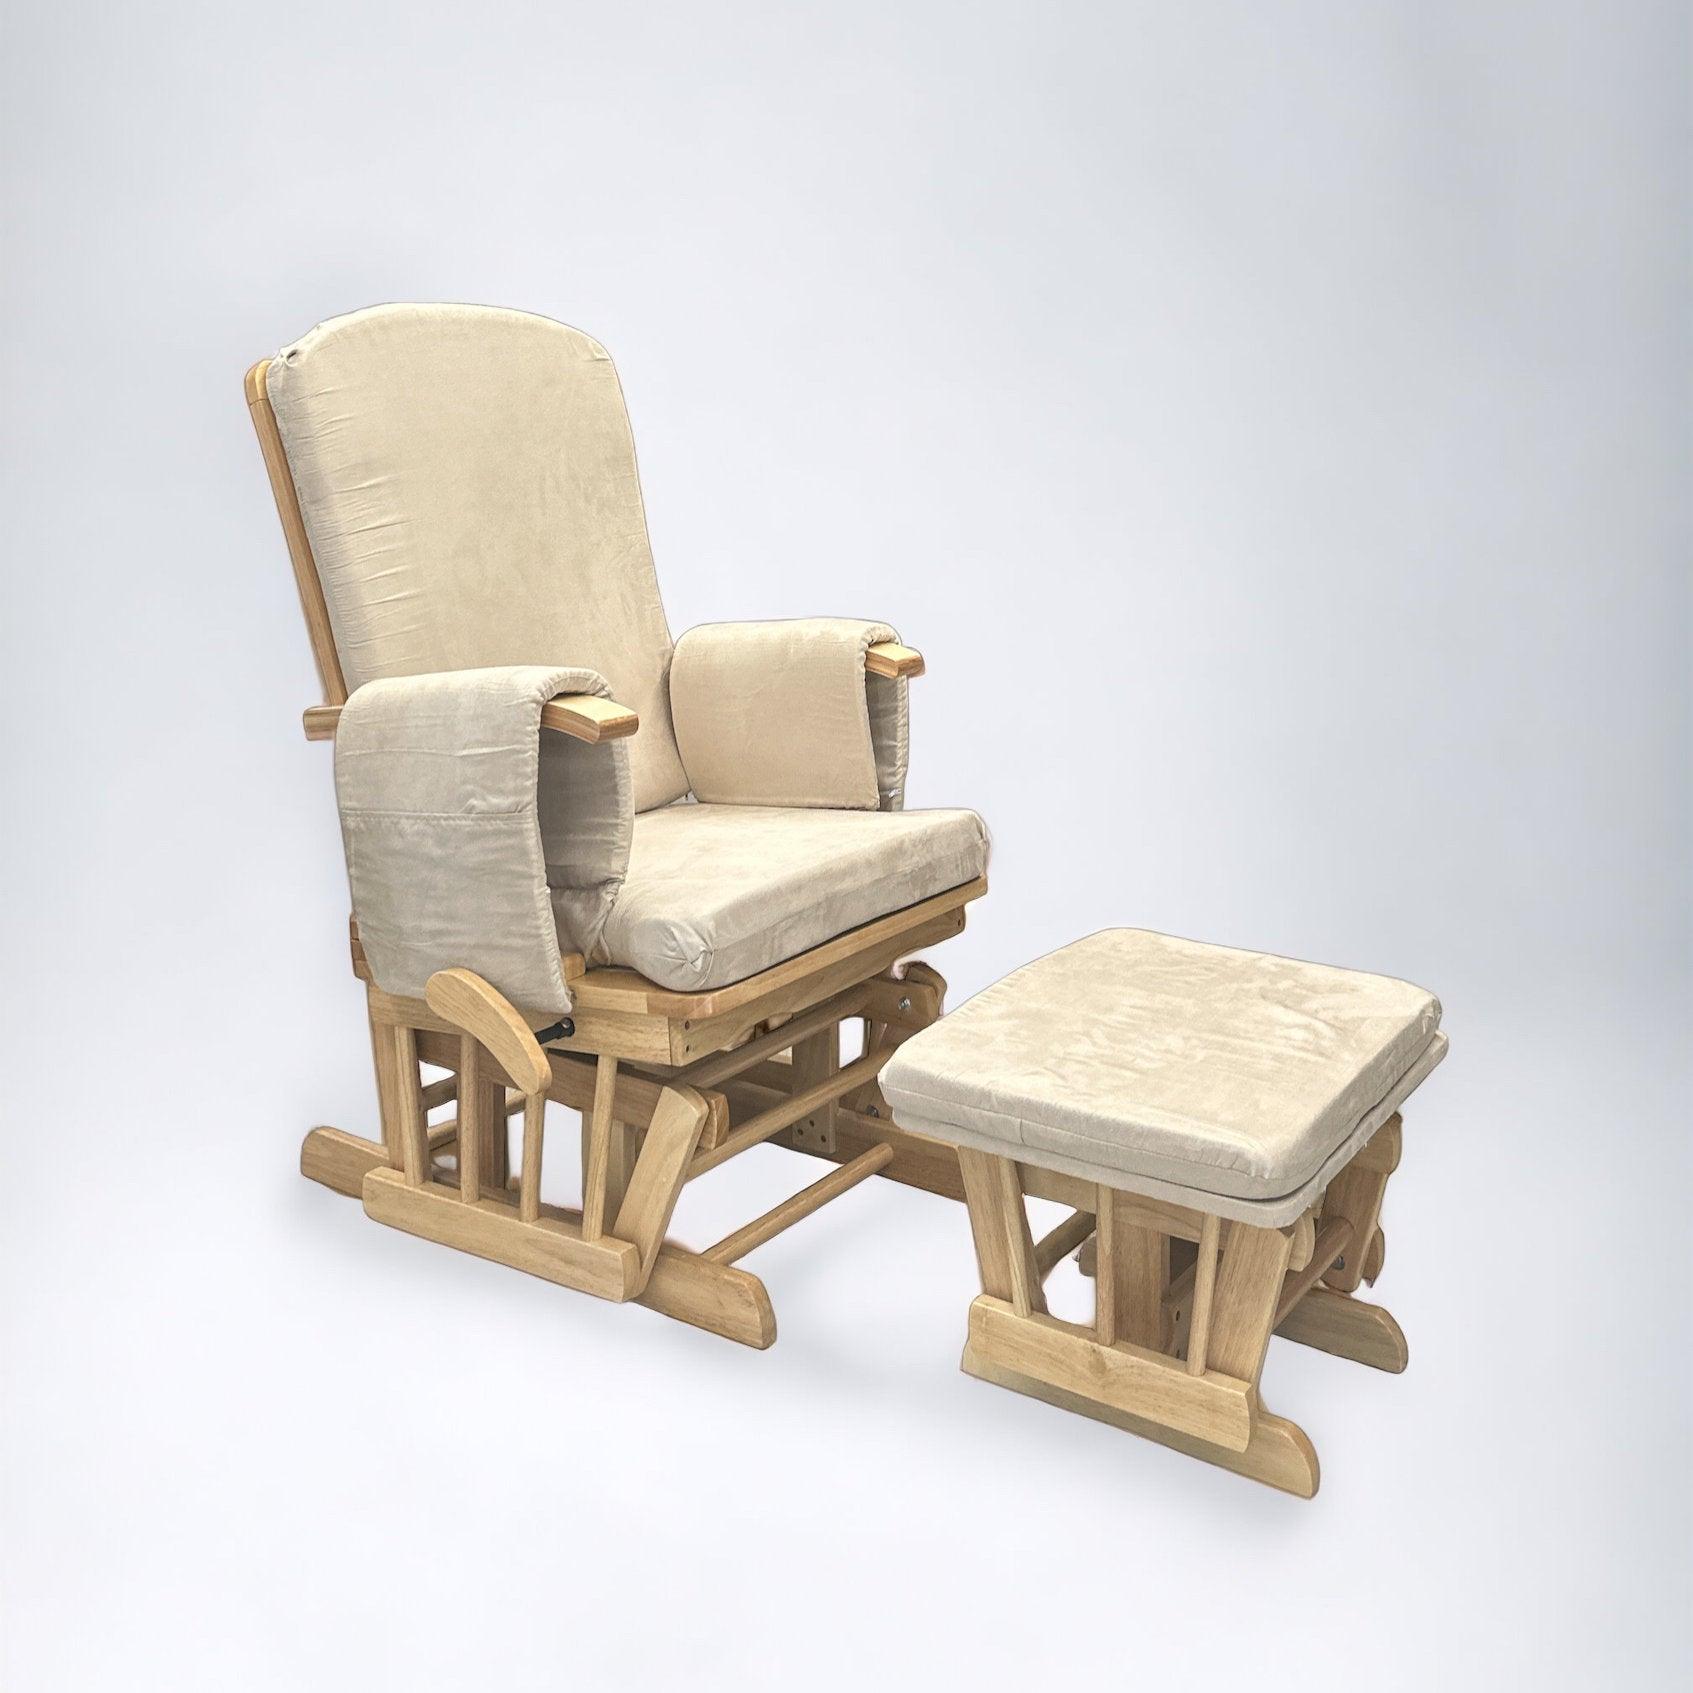 mk Collection - mkCollection Deluxe Gliding Nursing Chair with Ottoman - Mari Kali Stores Cyprus